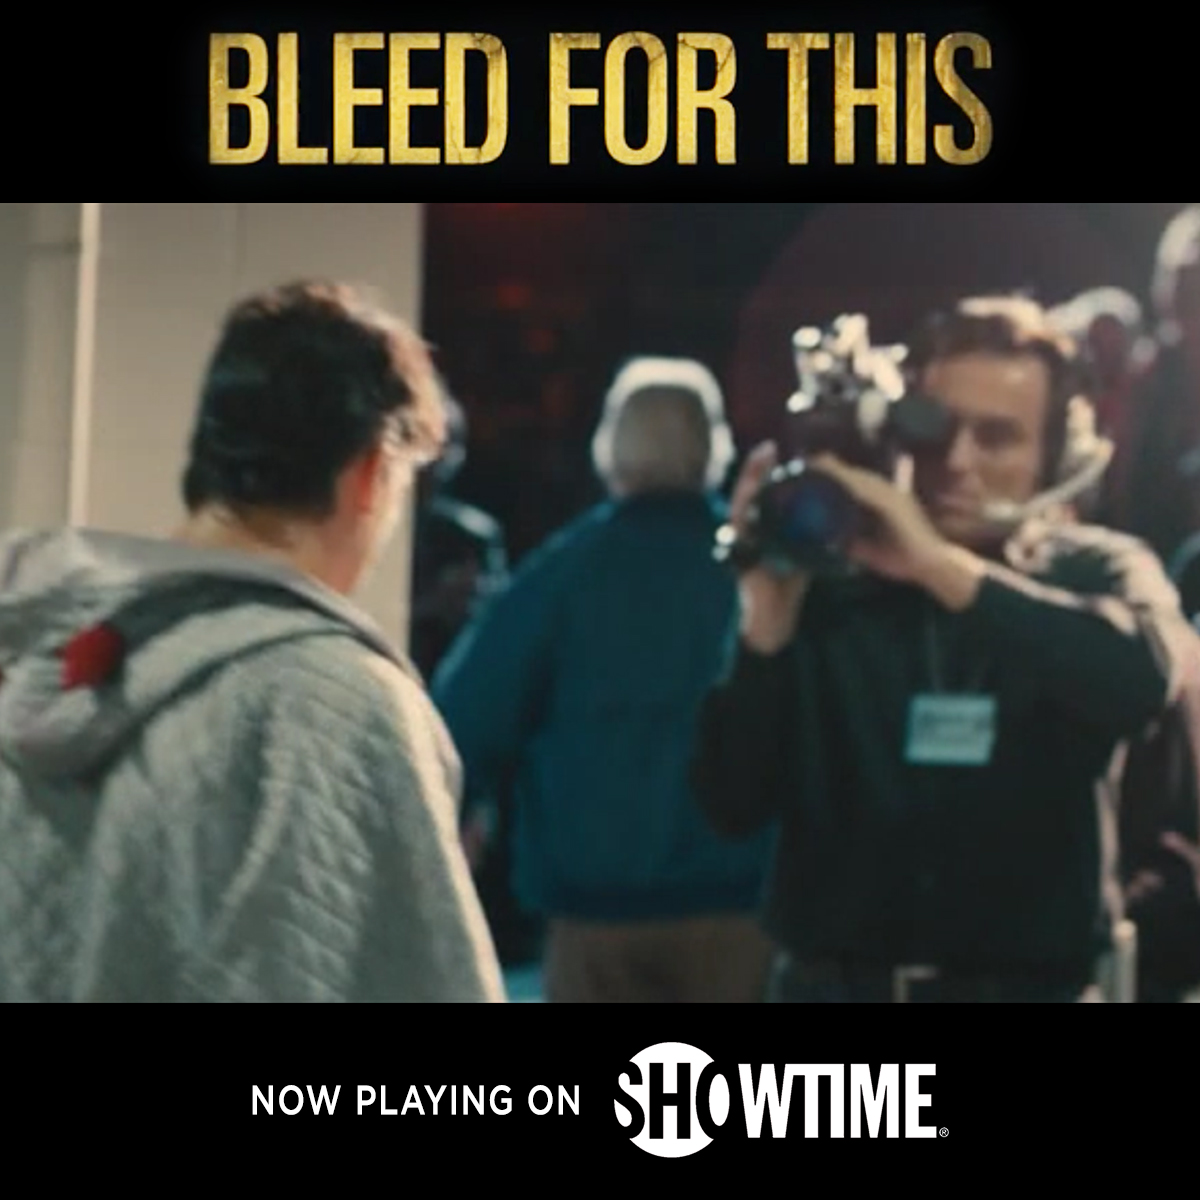 'The Bleed for This' incredible life story of 🥊@5XPAZ  Thank you to be part/#cast of an amazing story🙏💪. Today on @netflix  the movie become number 1 watched. 
Thank you @chadverdi @Miles_Teller @aaroneckhart #BenYounger director